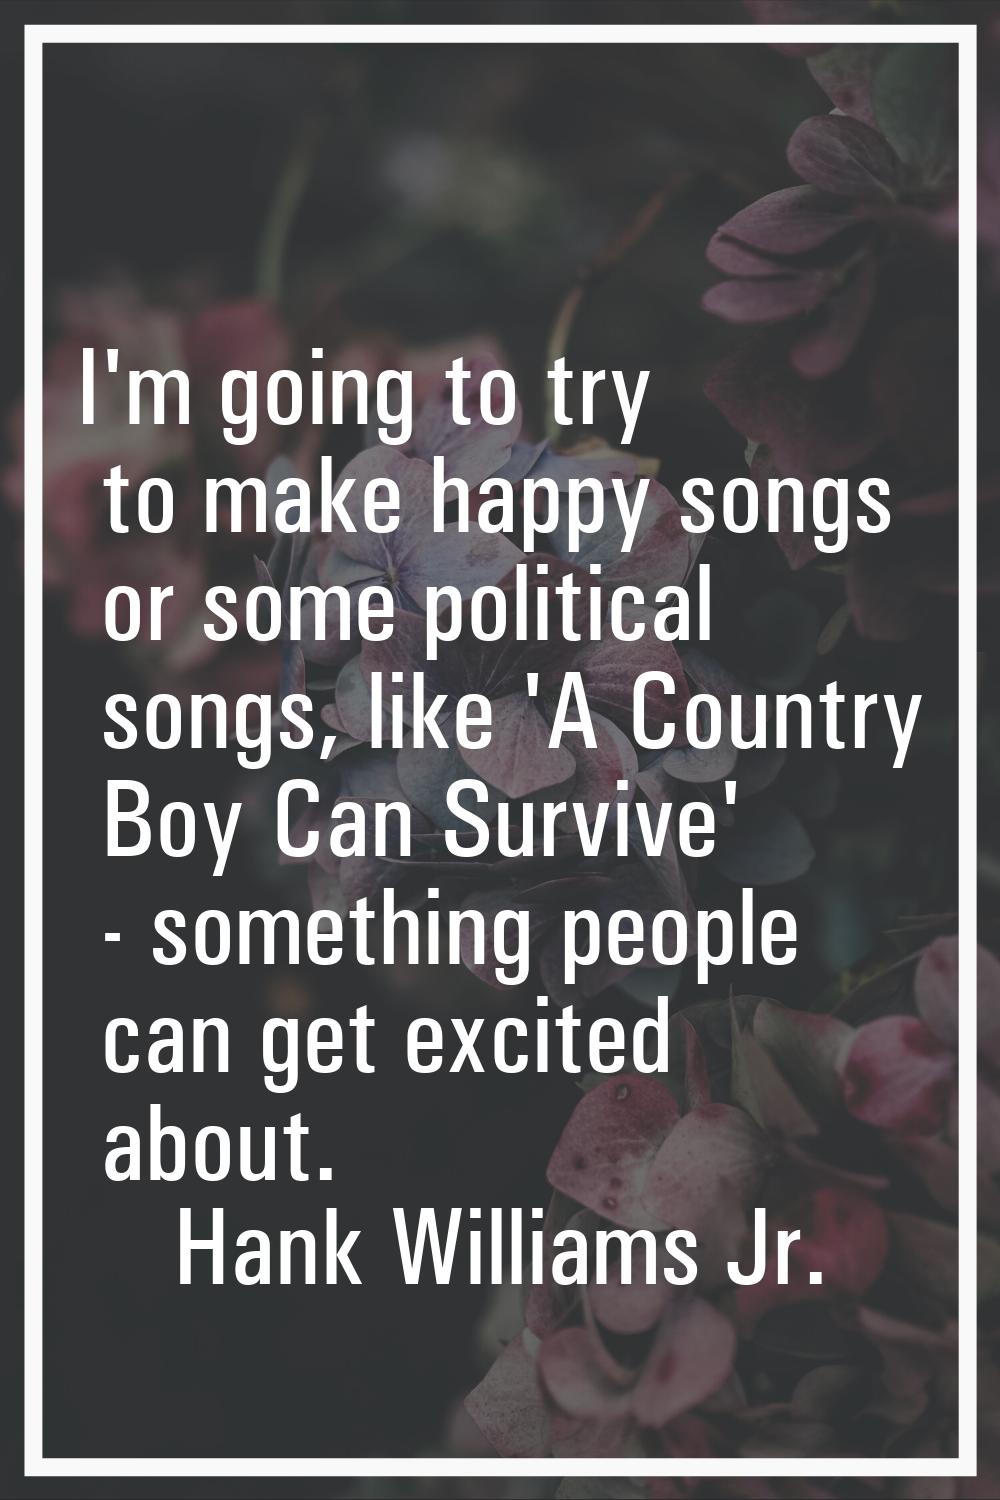 I'm going to try to make happy songs or some political songs, like 'A Country Boy Can Survive' - so